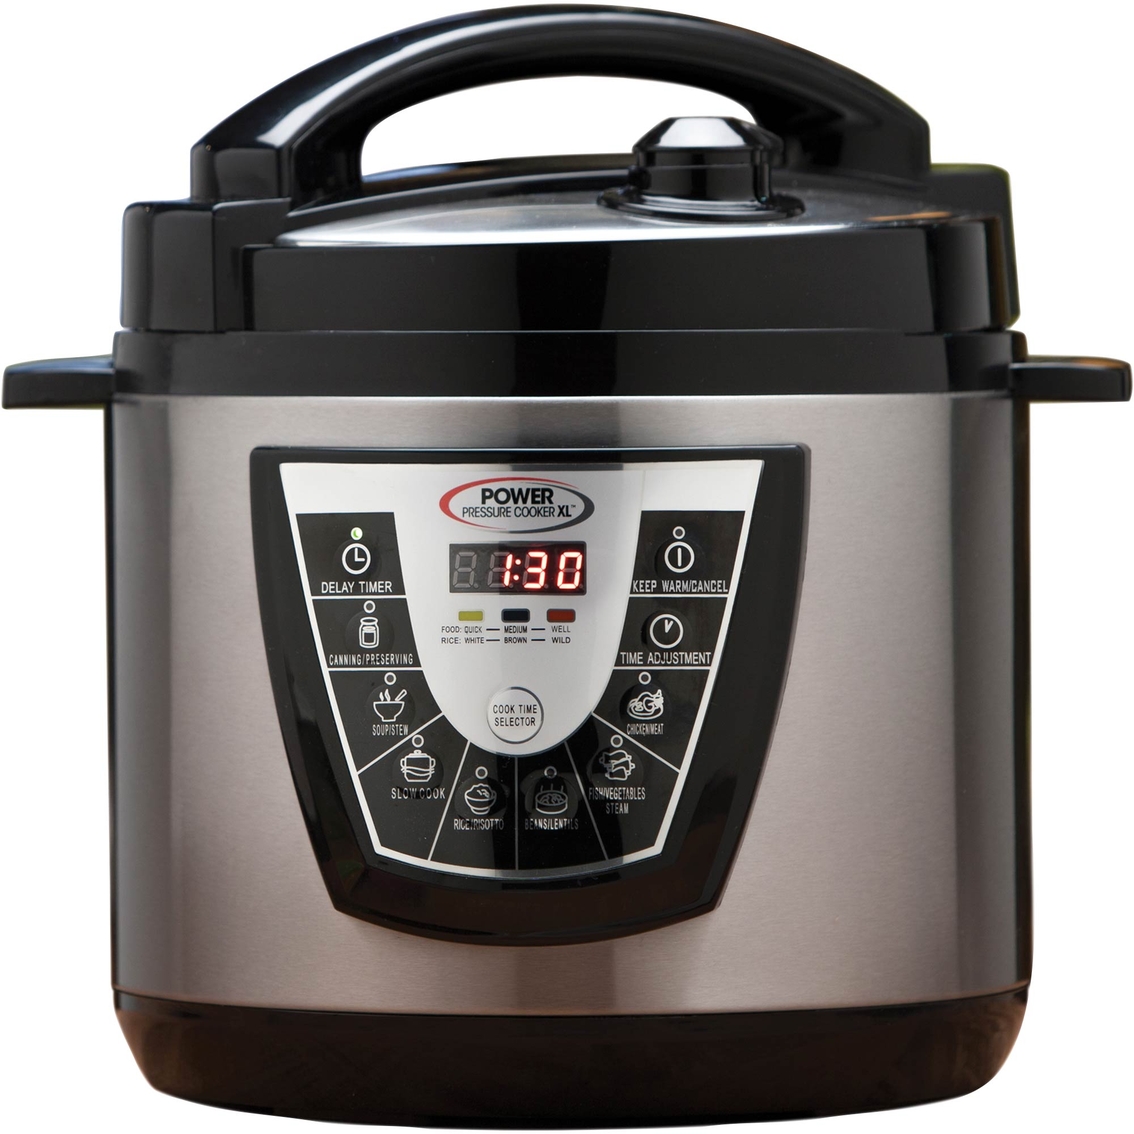 Power Pressure Cooker Xl 6 Qt. | Cookers & Steamers | Furniture